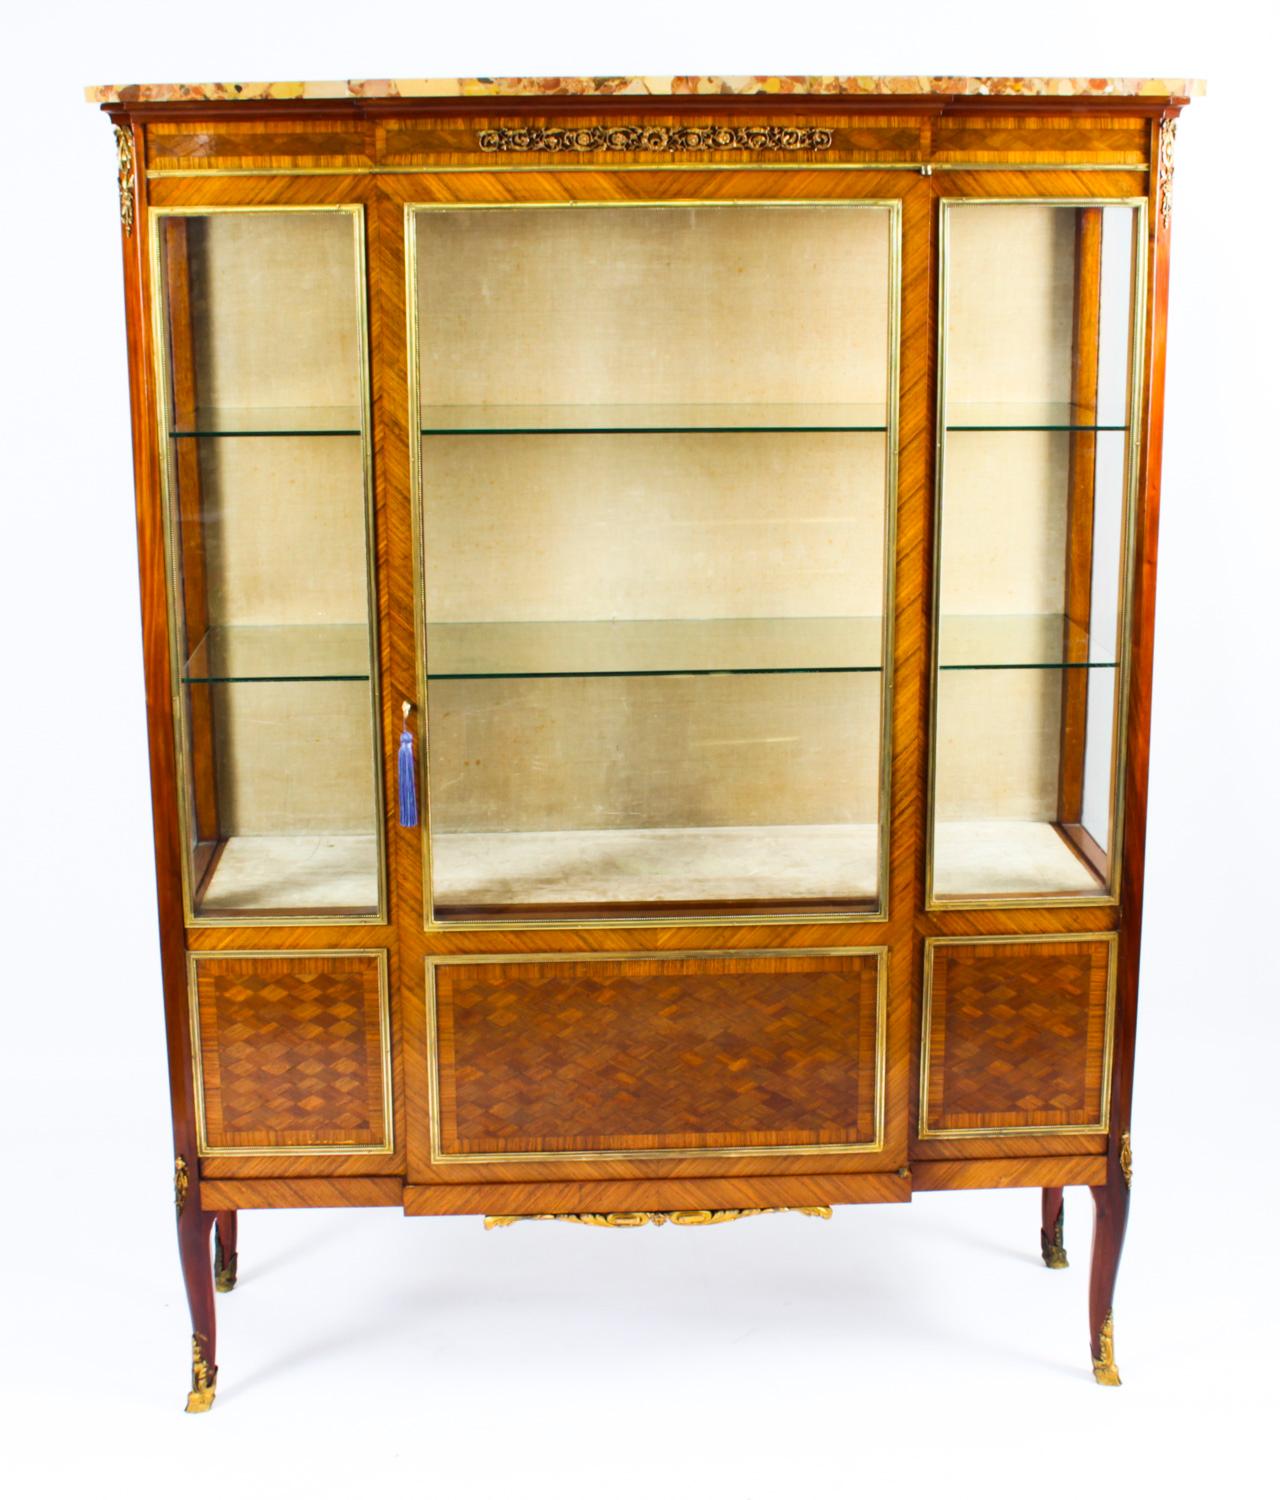 This is a beautiful antique French Louis Revival parquetry and ormolu mounted breakront vitrine, circa 1860 in date.
 
This beautiful cabinet has exquisite parquetry and crossbanded decoration with gilded bronze ormolu mounts. The shaped breccia